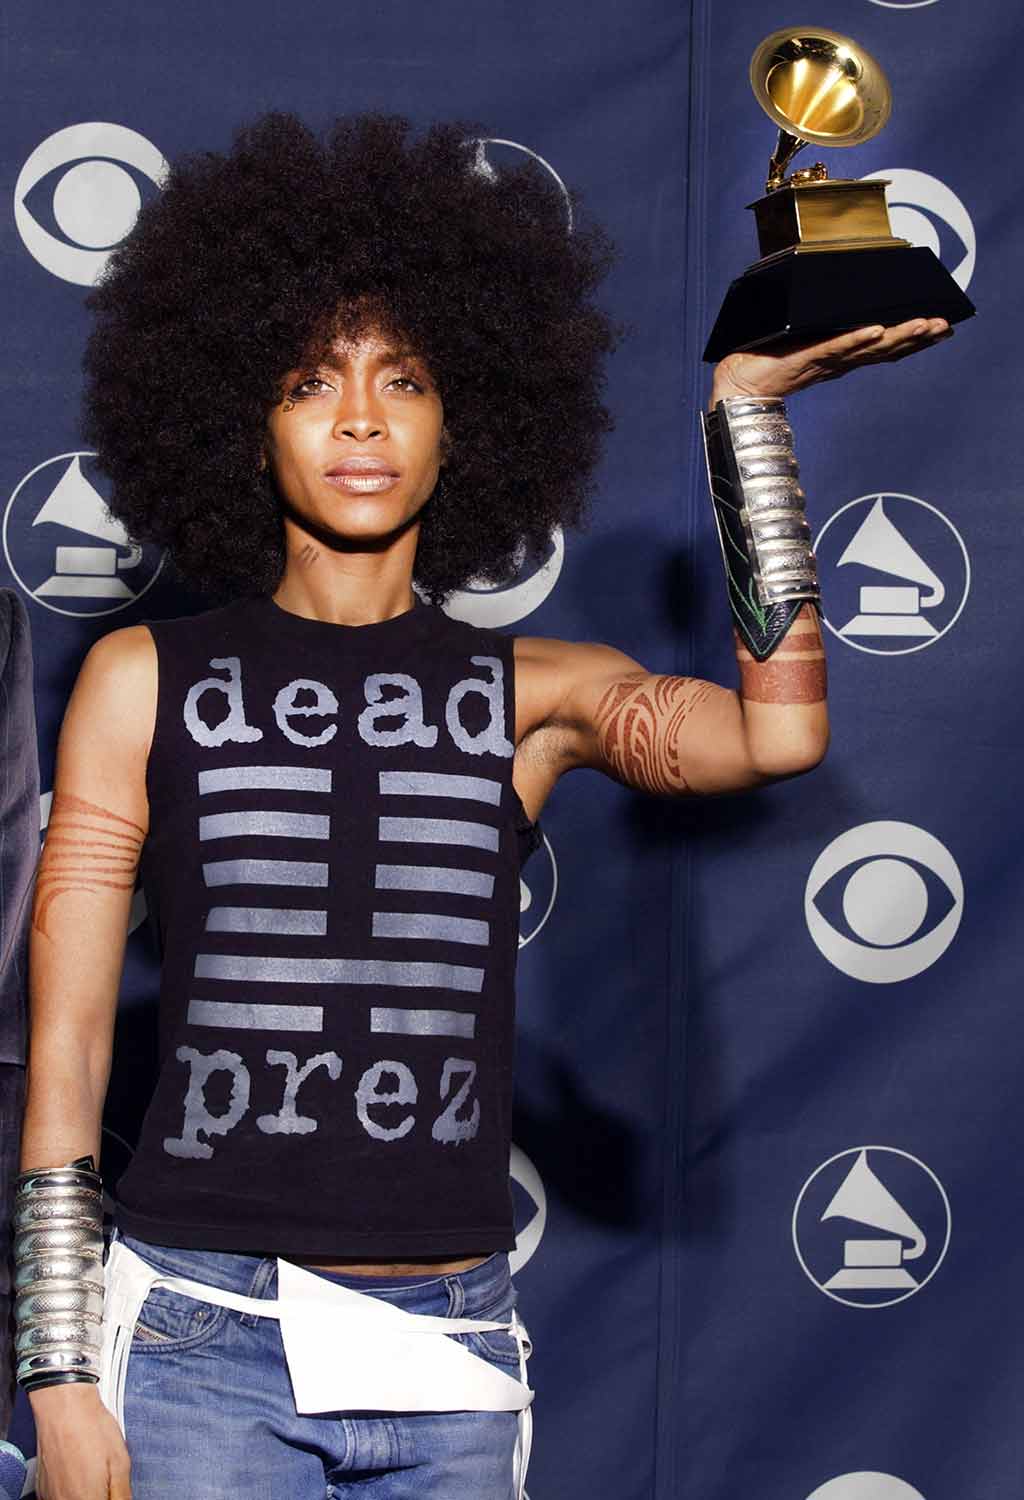 Think You Know Erykah Badu? Let’s See!